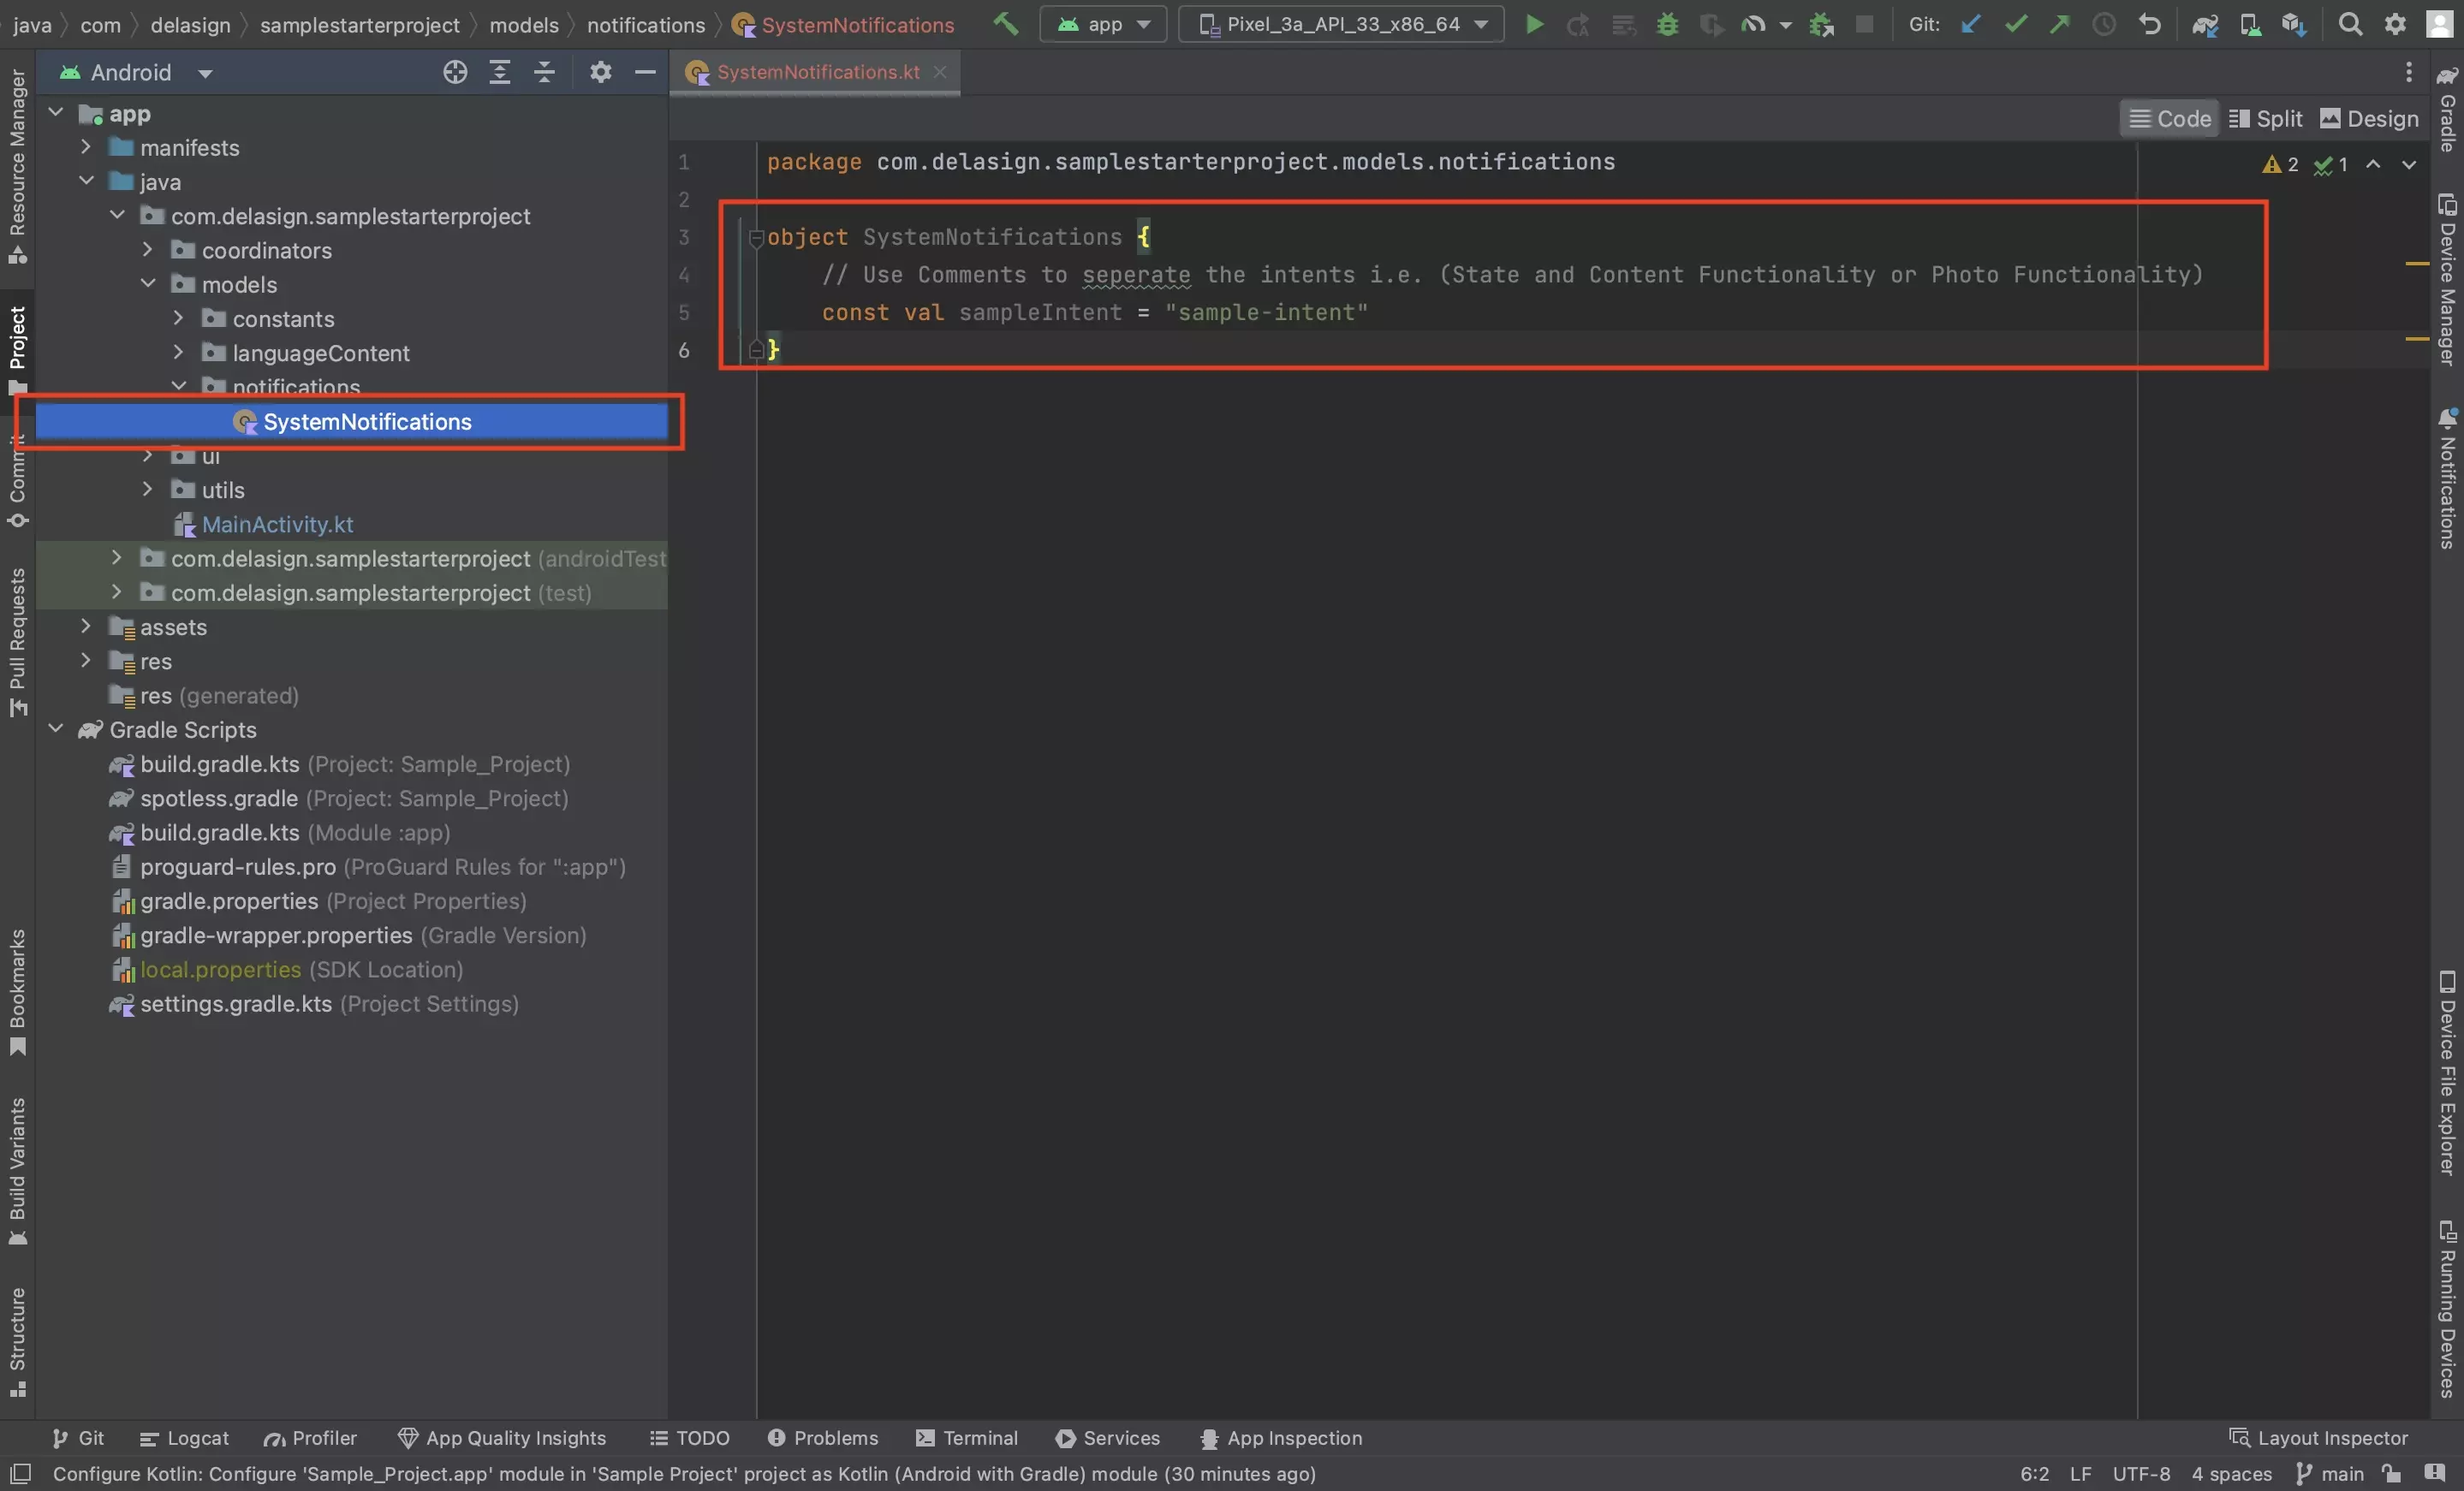 A screenshot of Android Studio show how we model intents.